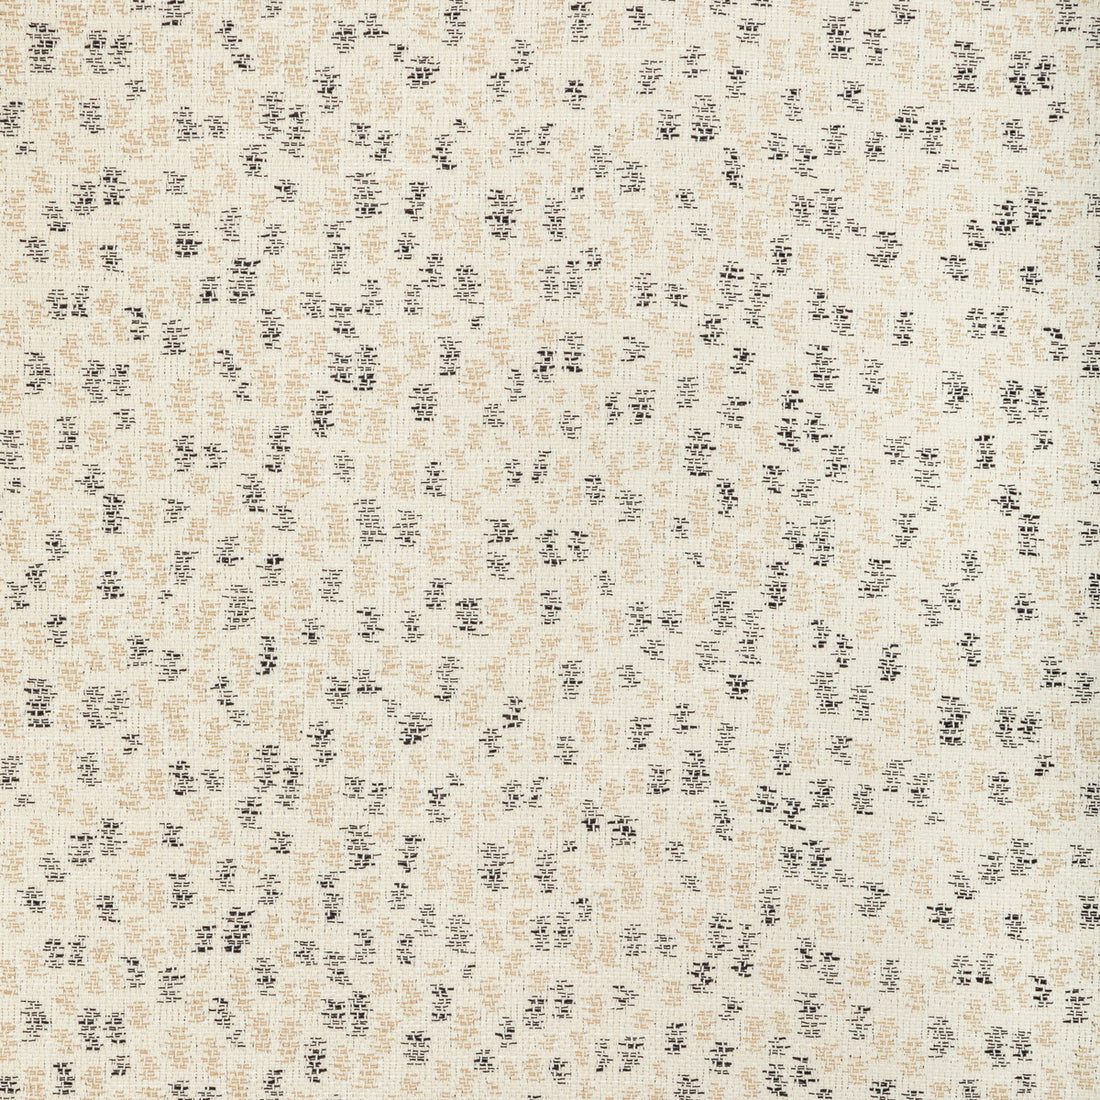 Combe fabric in ivory color - pattern GWF-3787.168.0 - by Lee Jofa Modern in the Kelly Wearstler Oculum Indoor/Outdoor collection